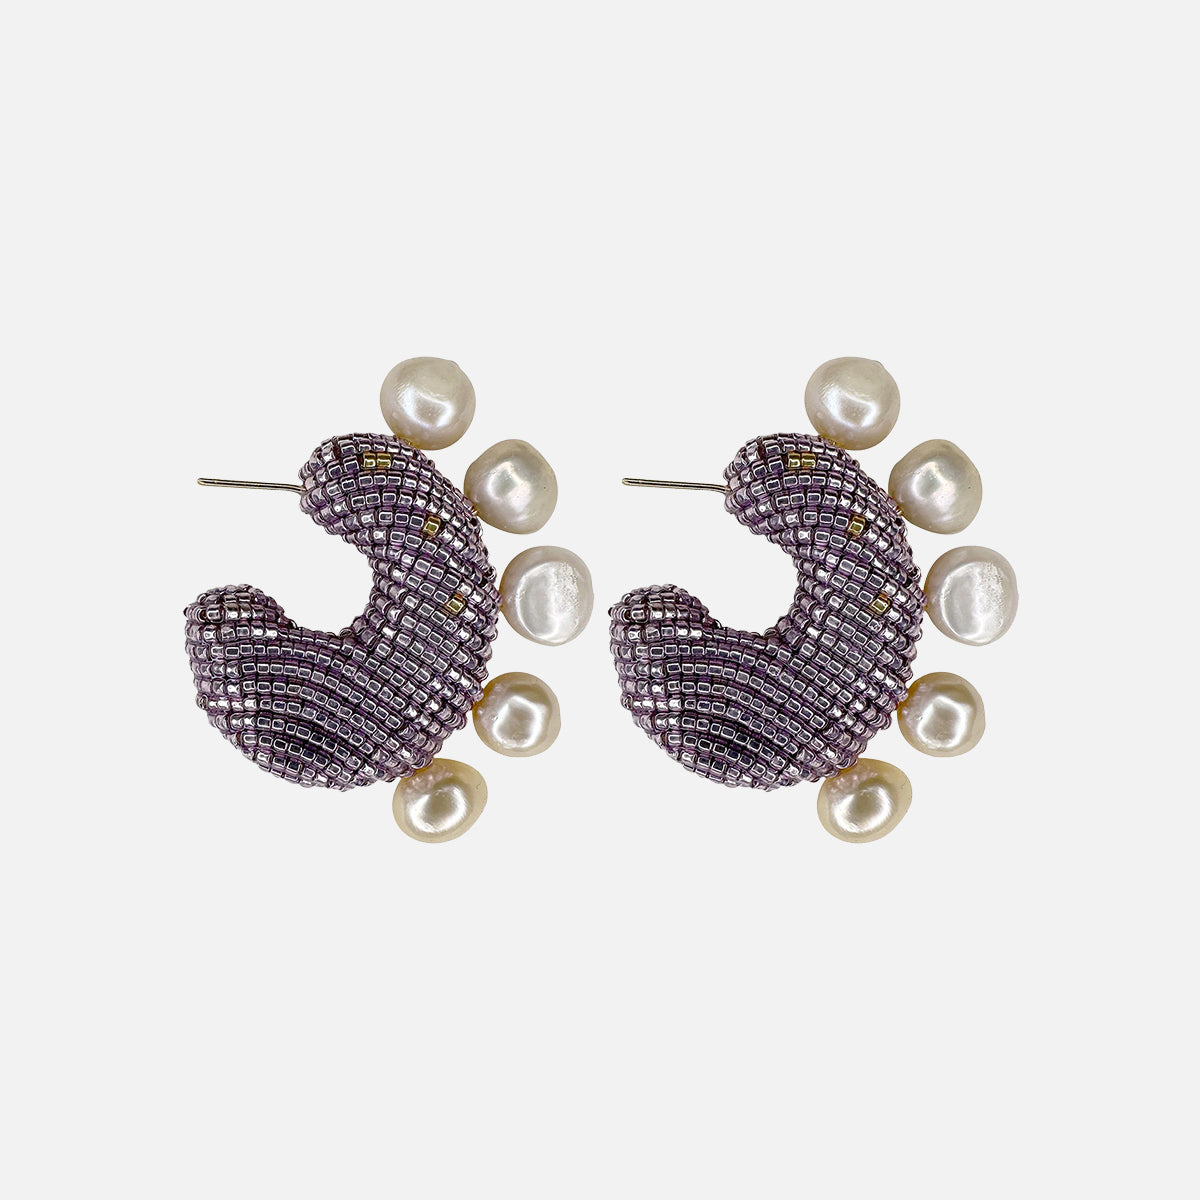 Solito Pearled Earrings, Lilac